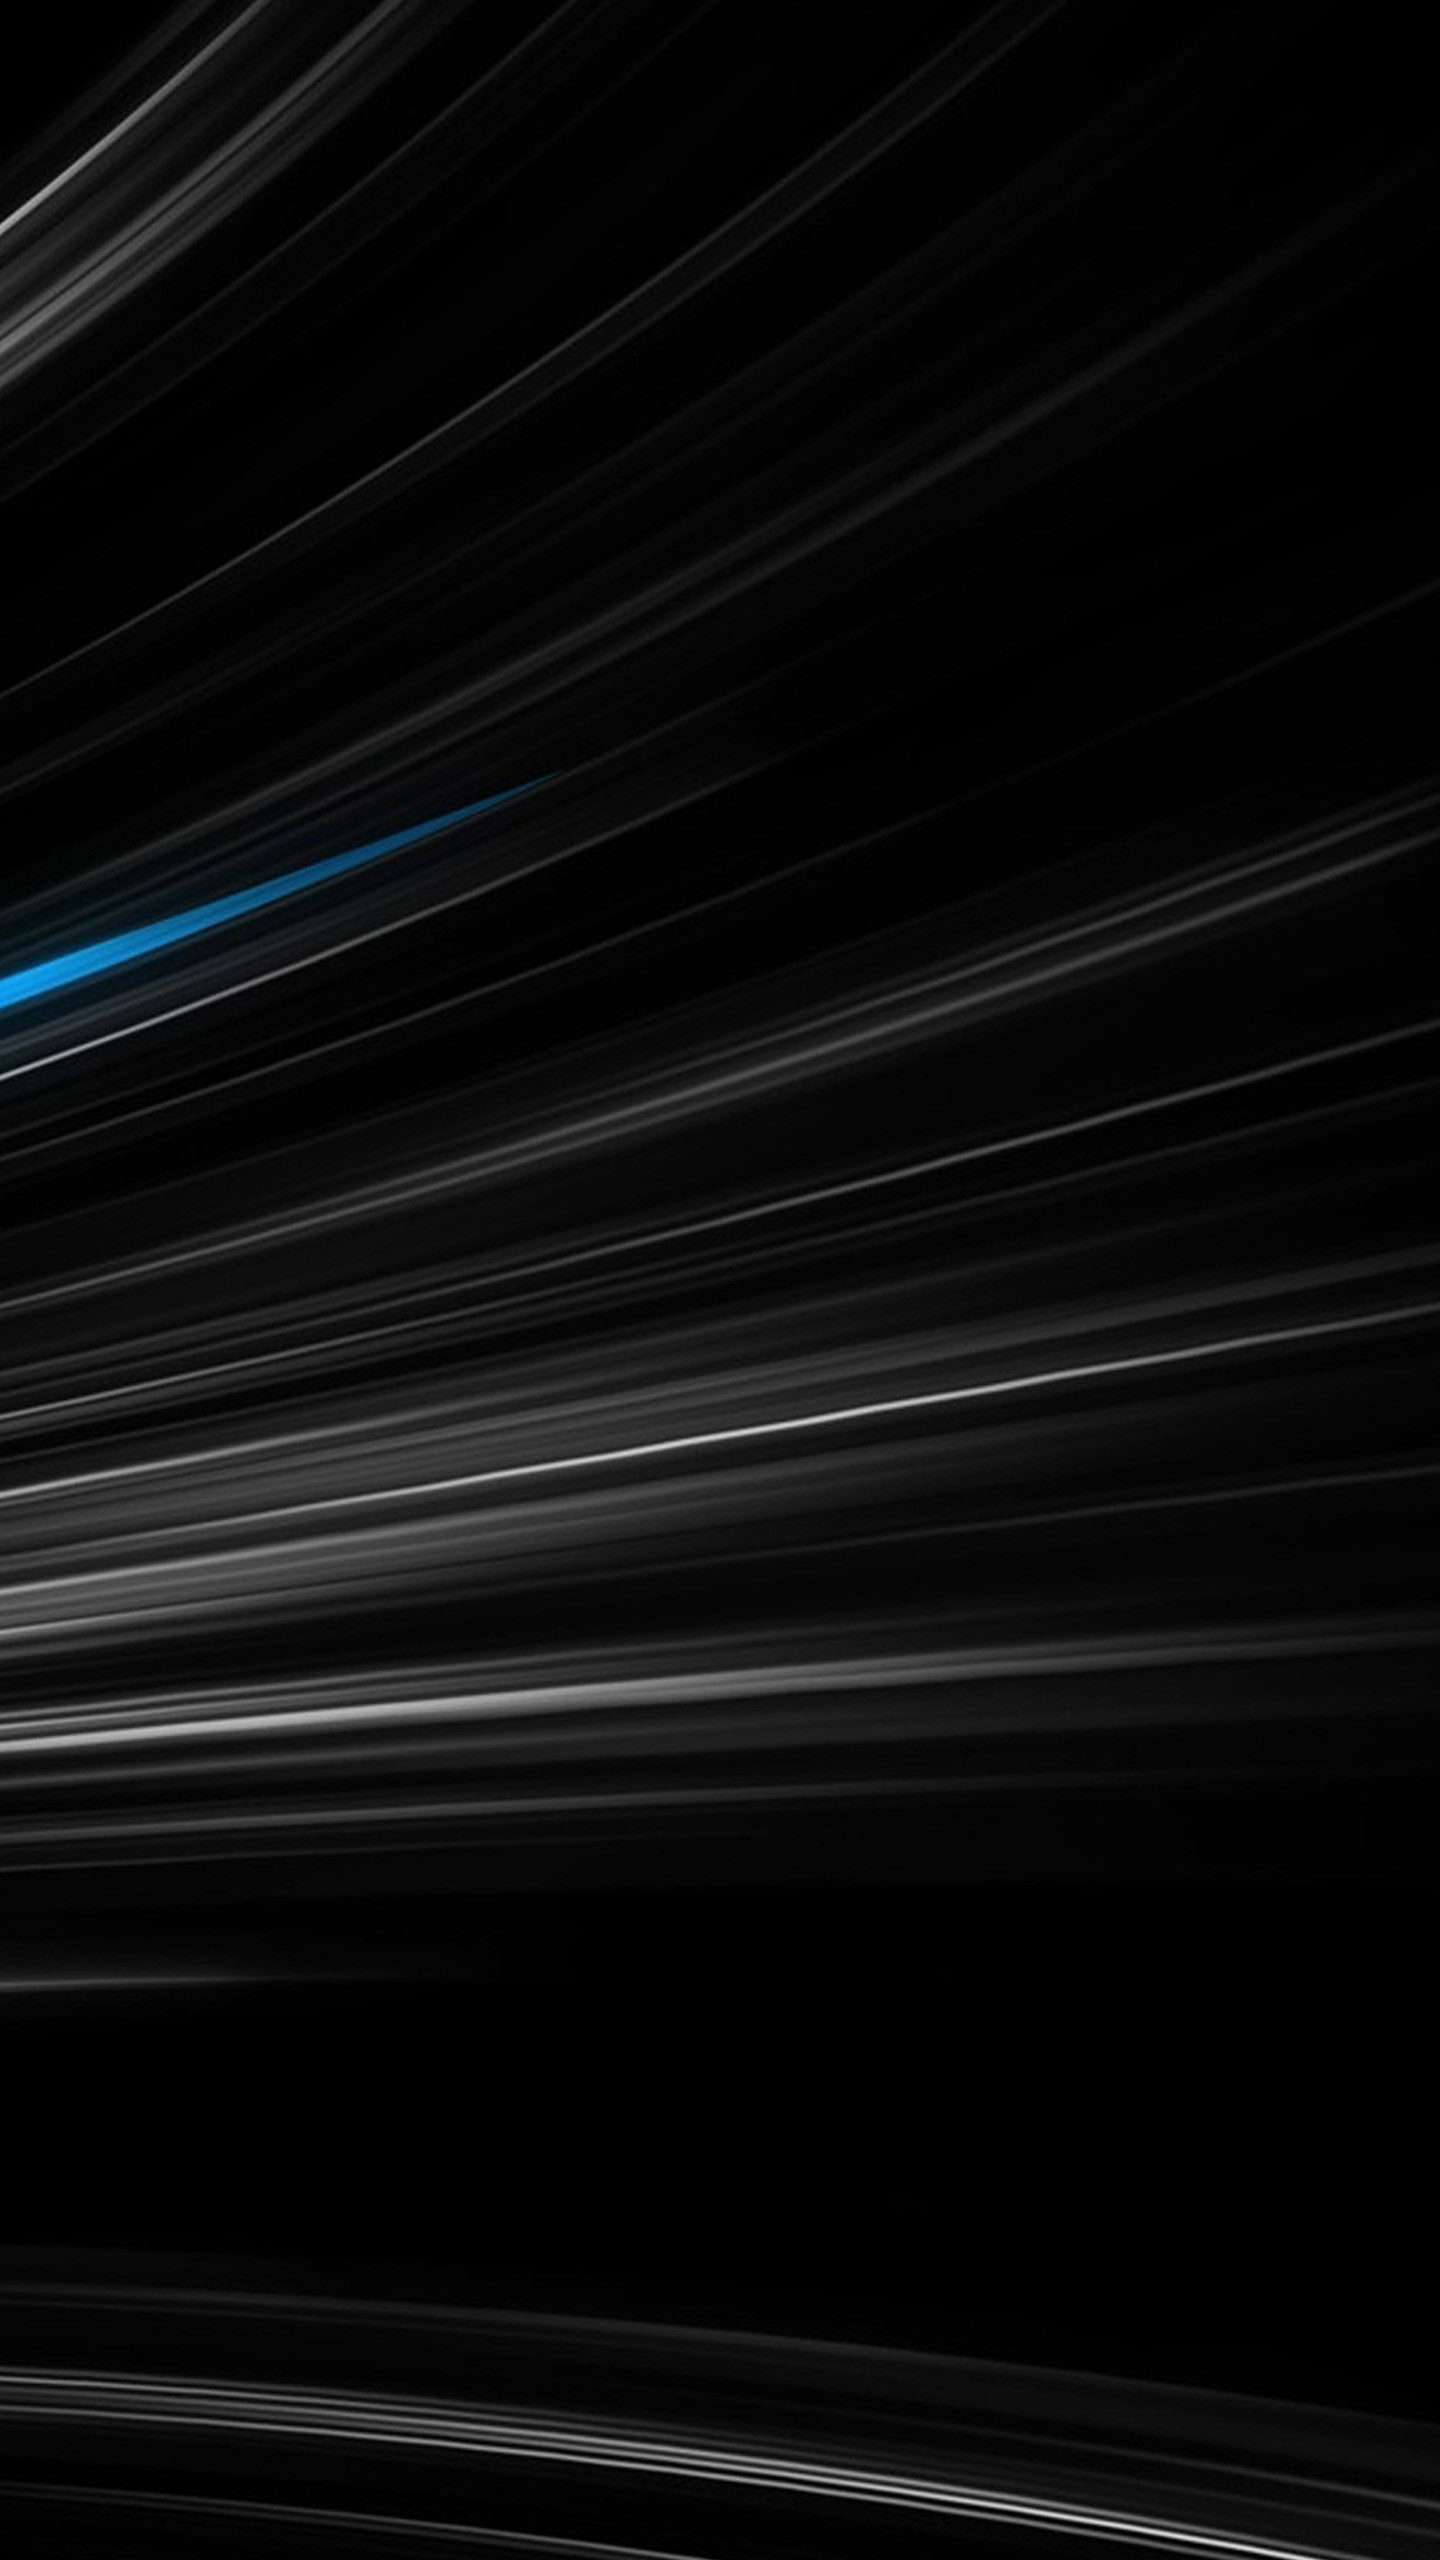 1440x2560 Blue Light Wallpaper Abstract D Wallpapers in jpg format for free 1440Ã2560